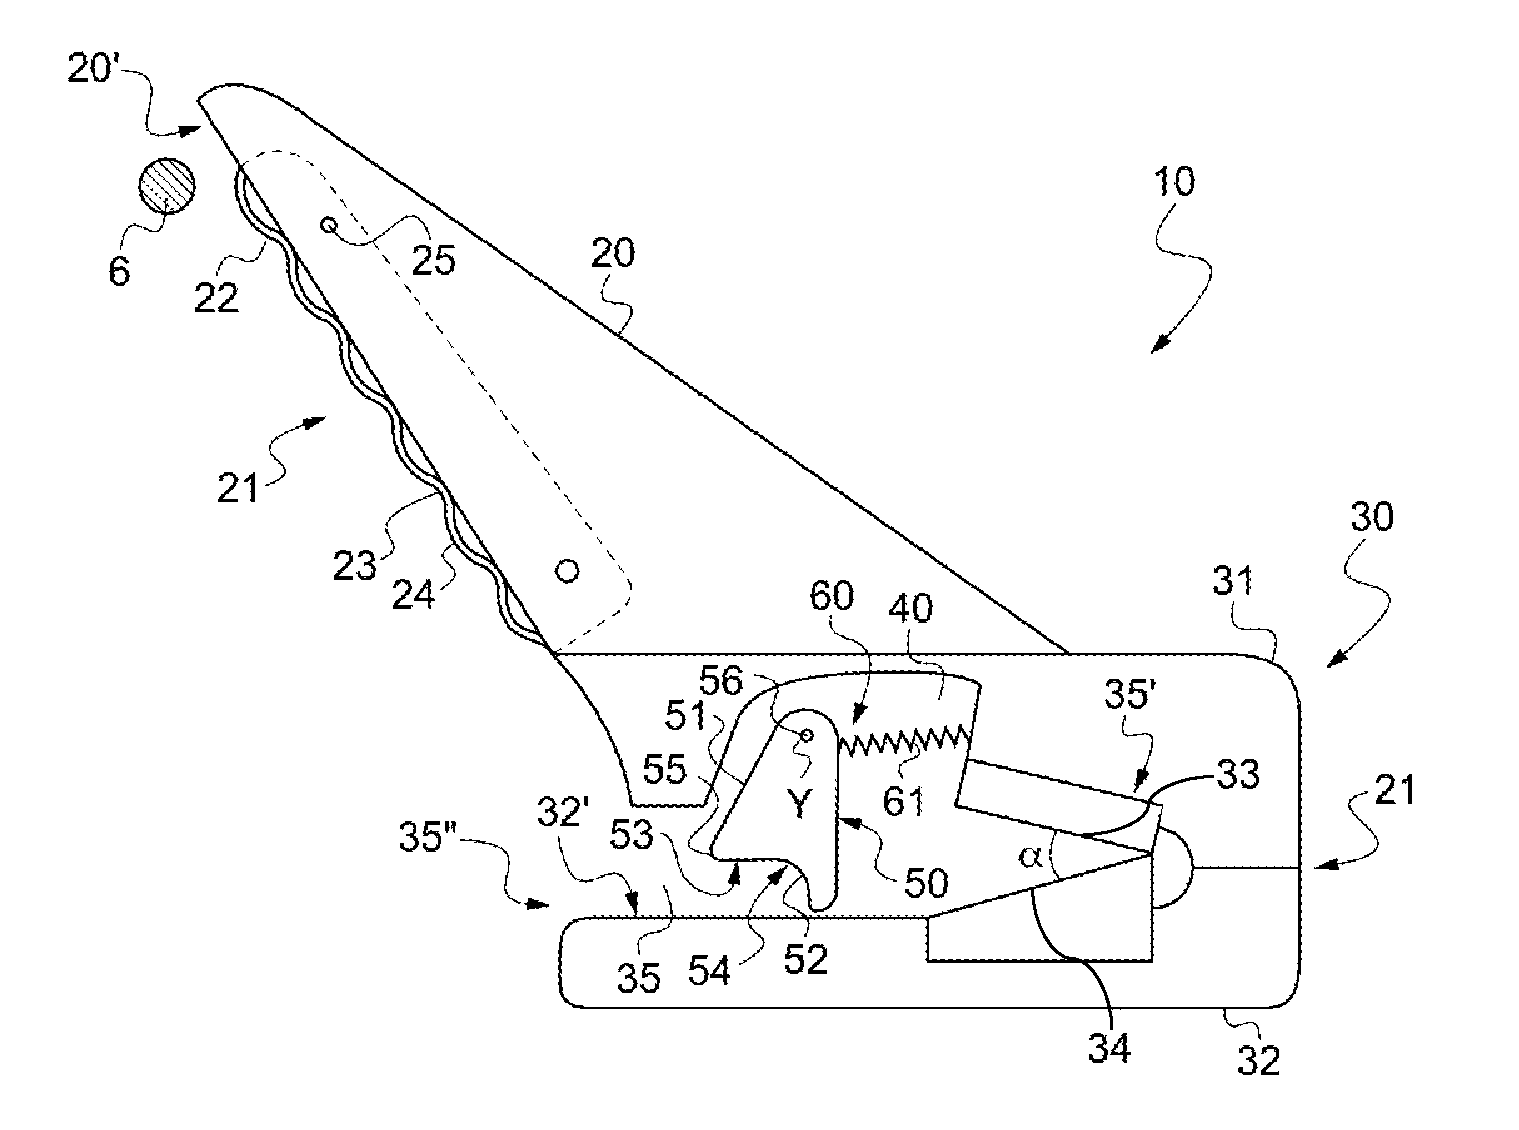 Cable-cutter device